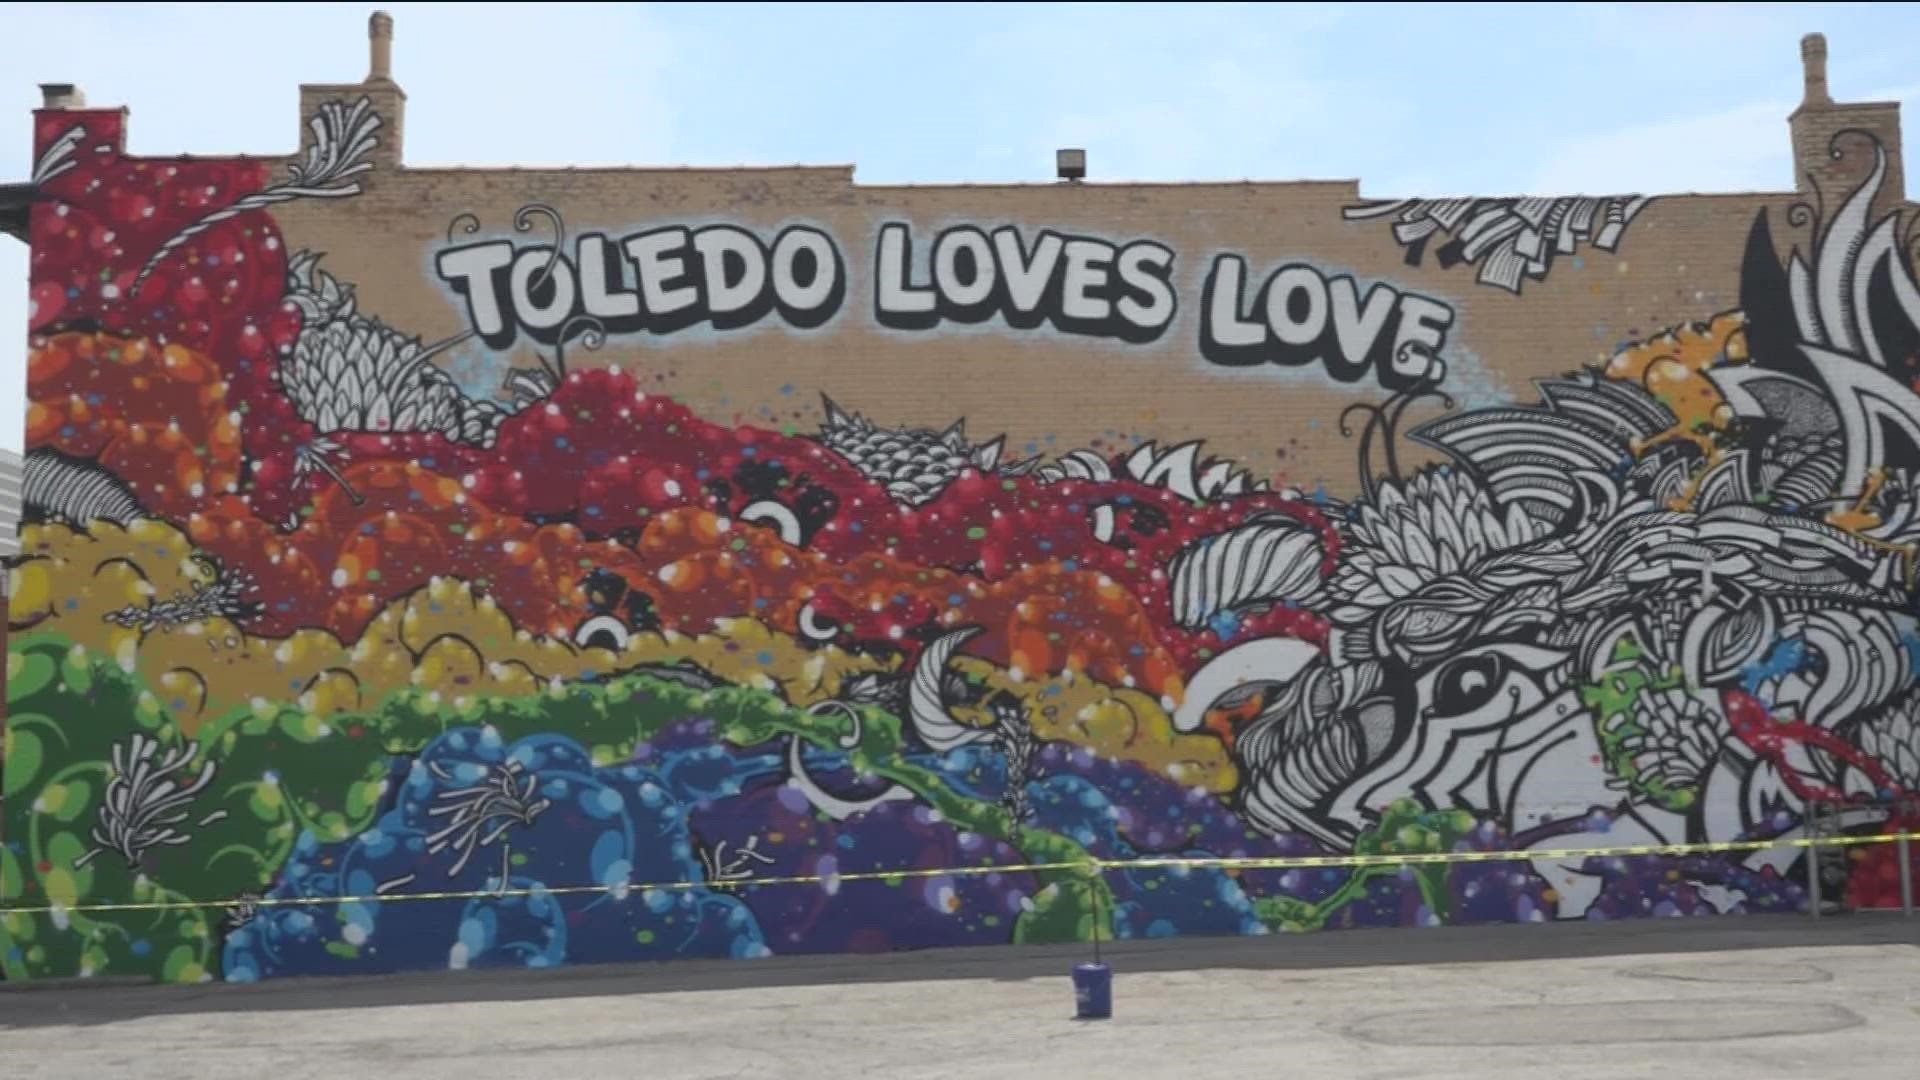 The Toledo Love Wall off Adams Street is a big part of the LGBTQIA+ community. The wall is coming up on 10 years since finished and was freshened up to celebrate.